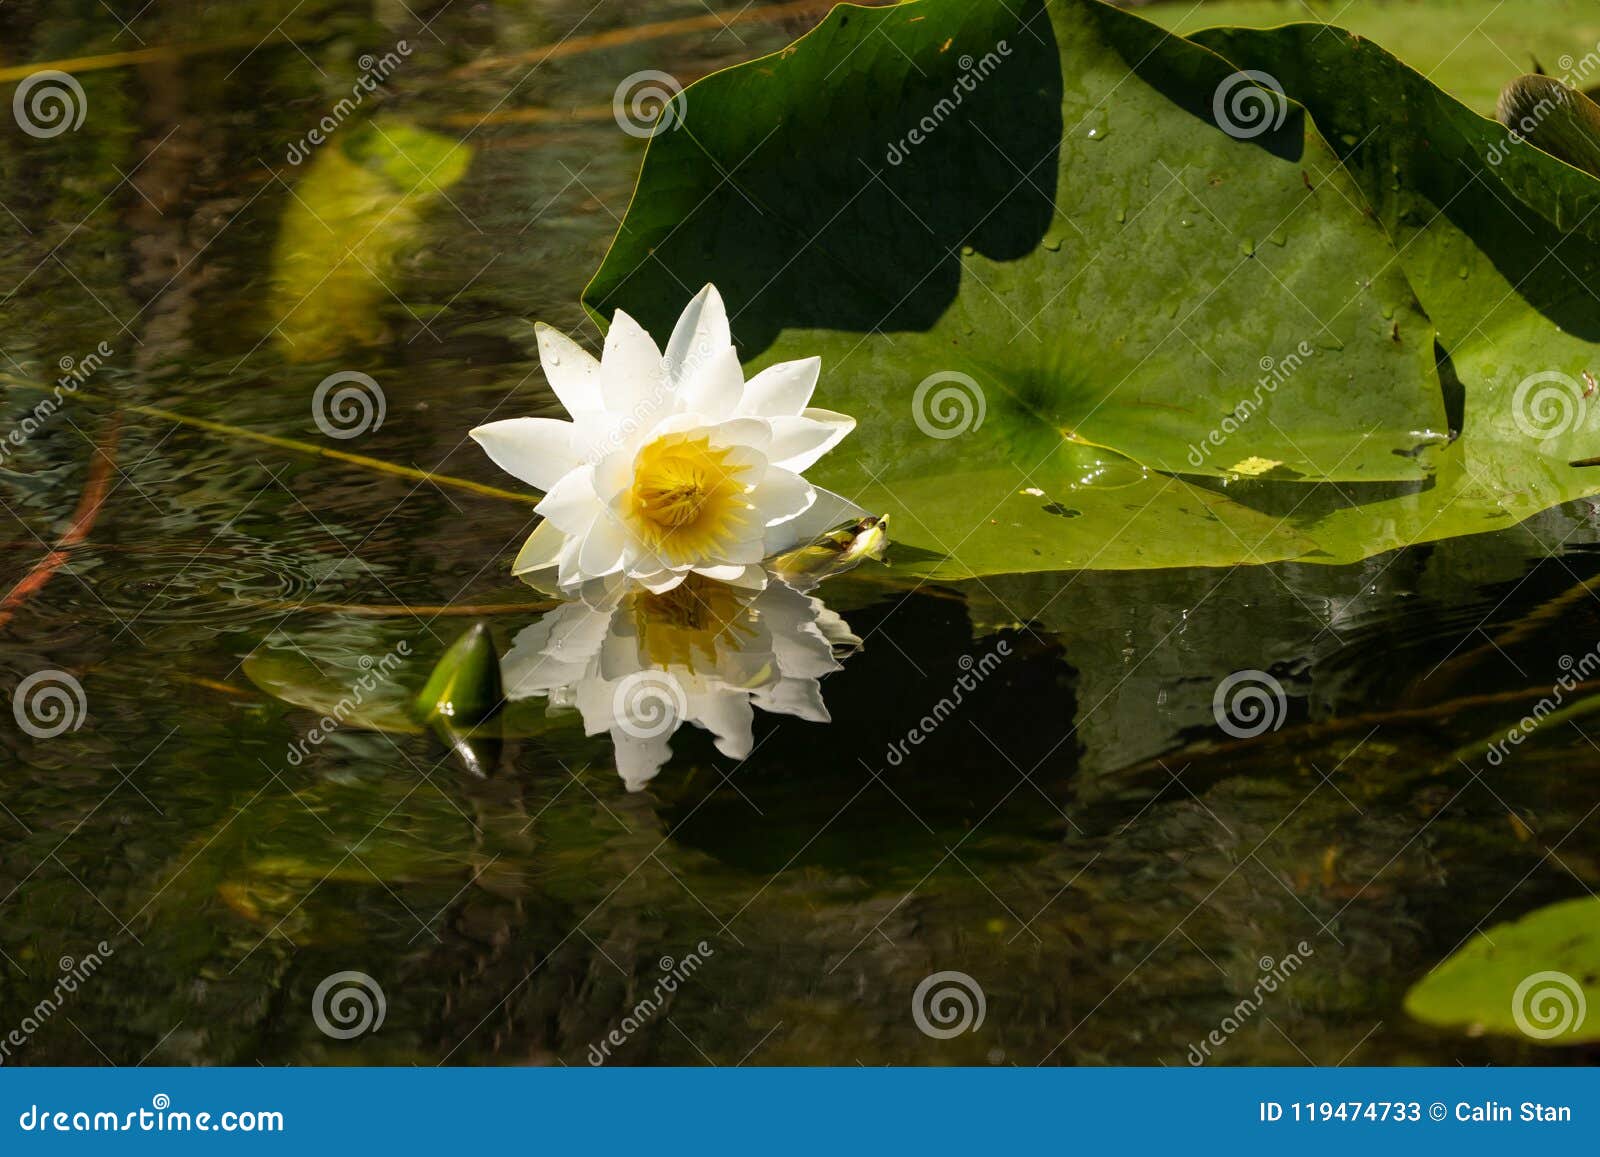 white lily lotus with yellow polen on dark background floating o